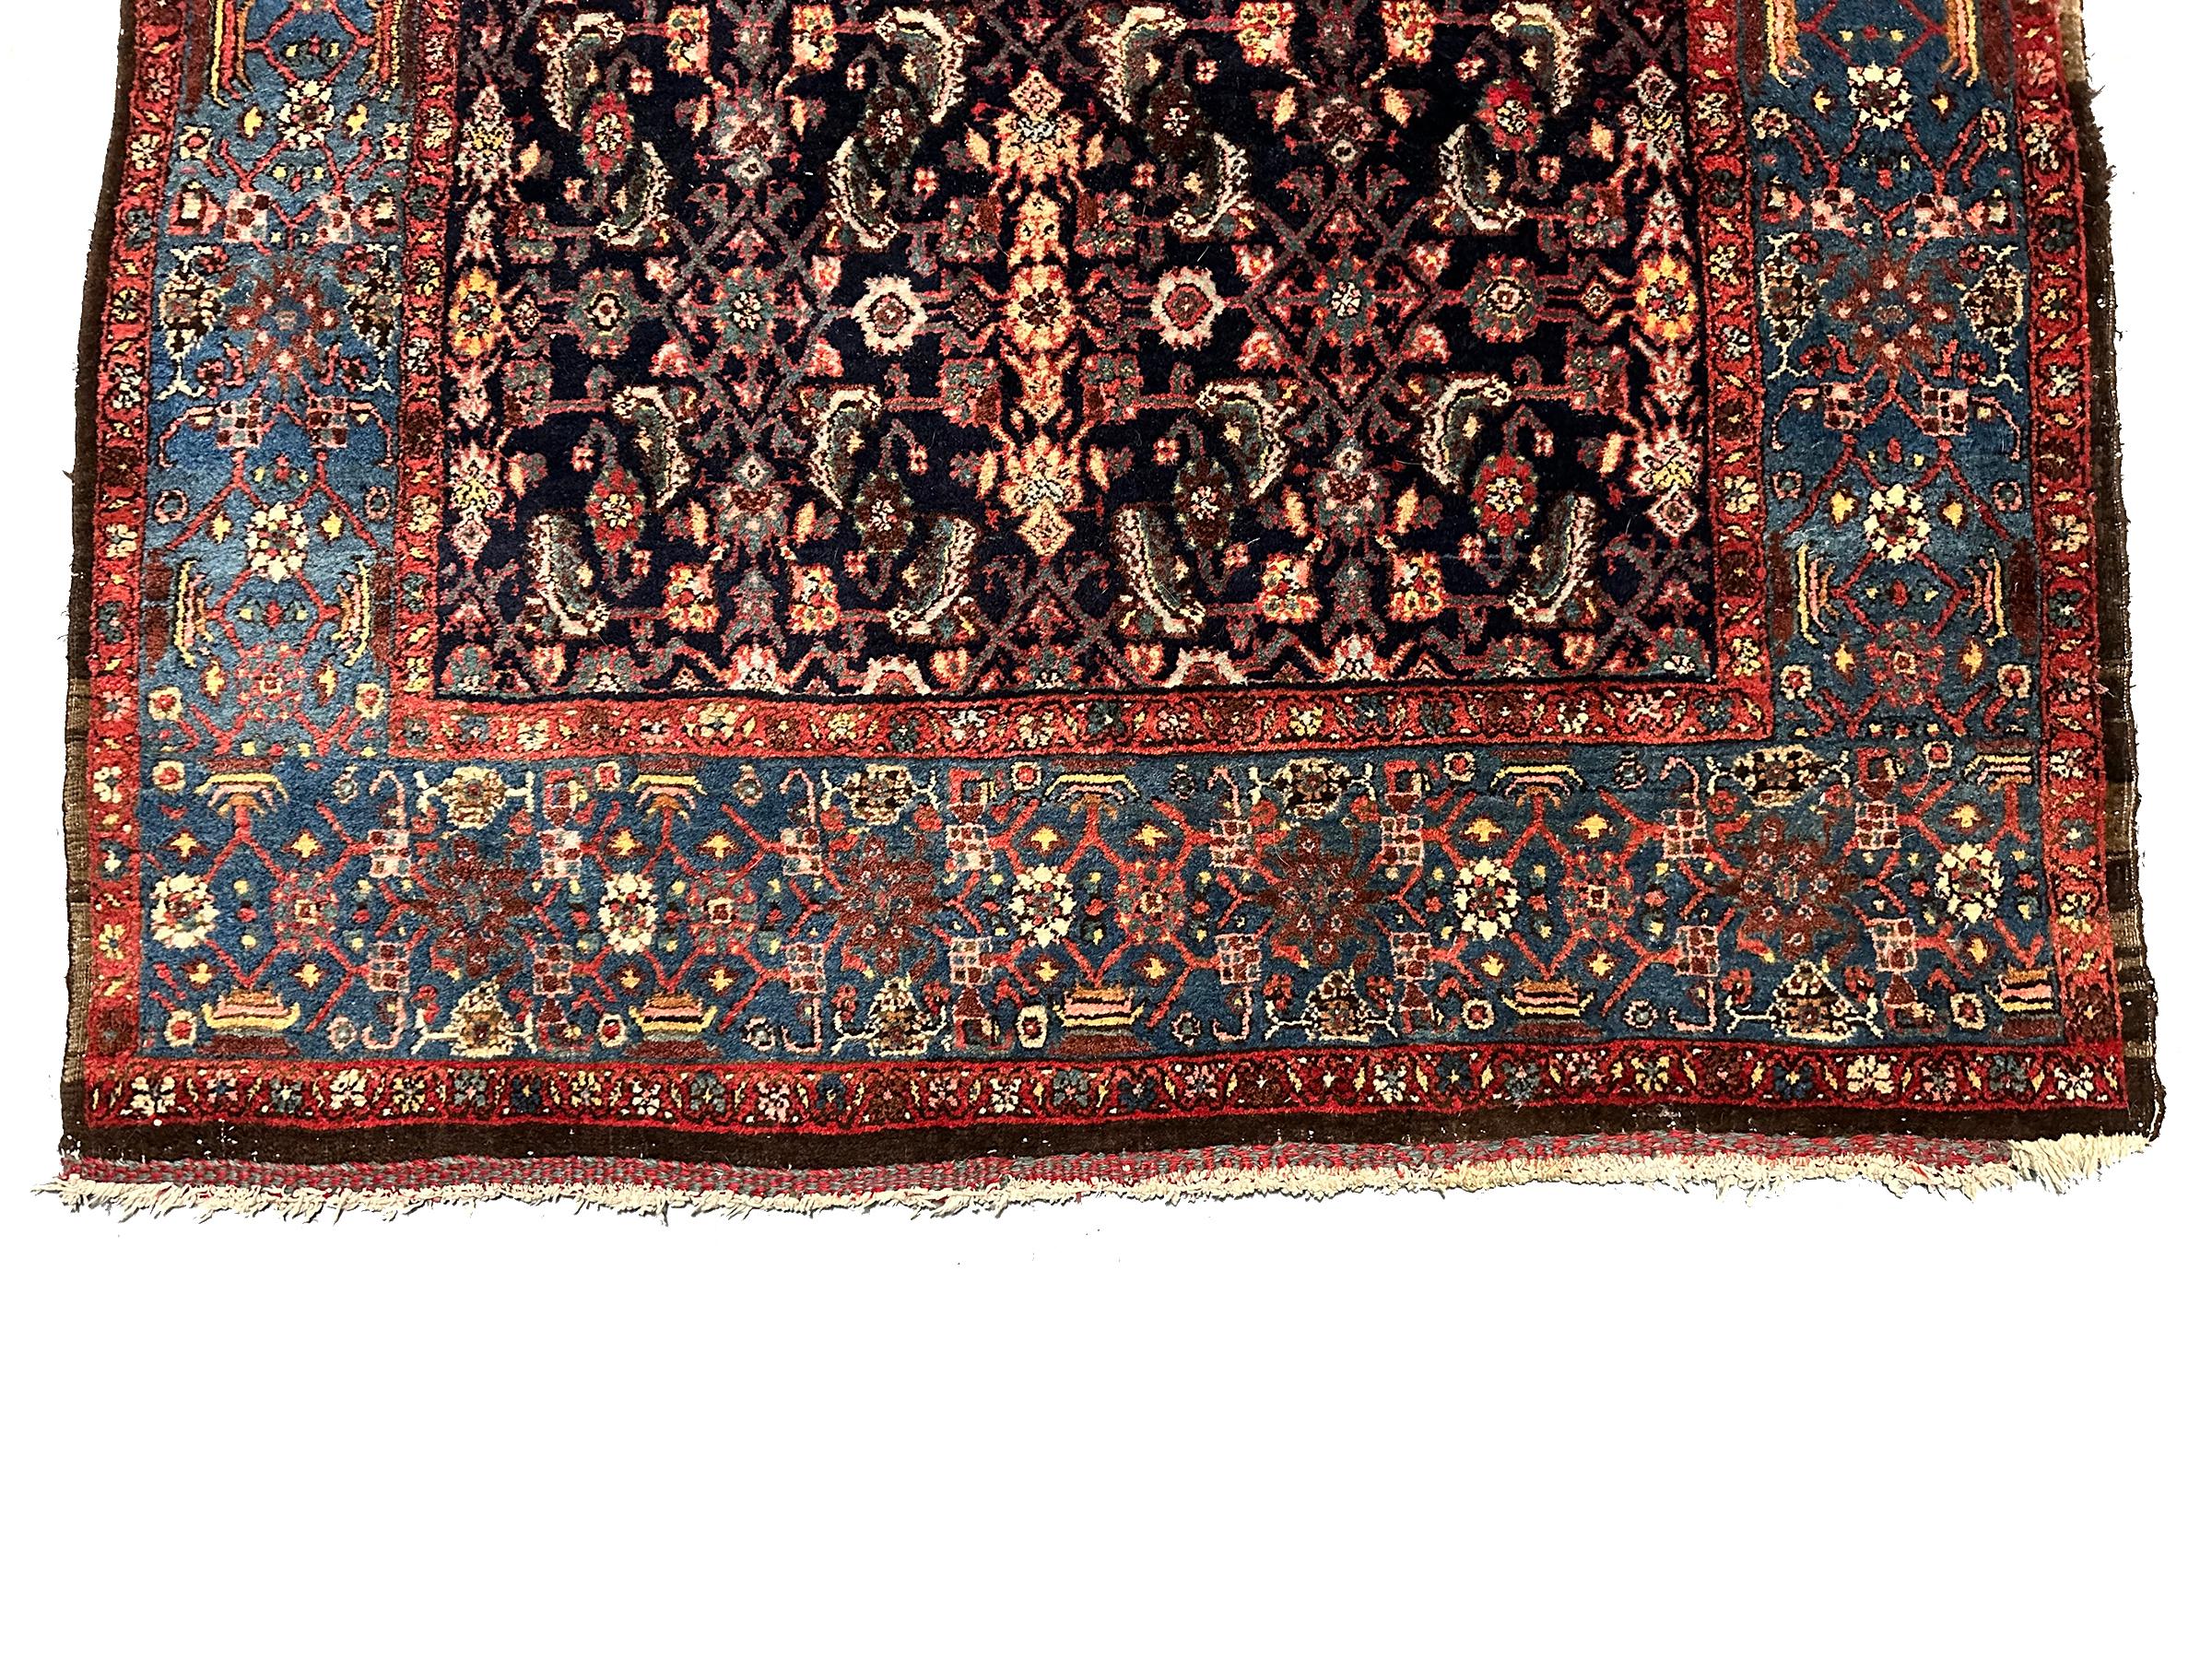 Hand-Knotted 1900 Antique Bijjarr Rug geometric overall Black 4x8 127cm x 239cm For Sale